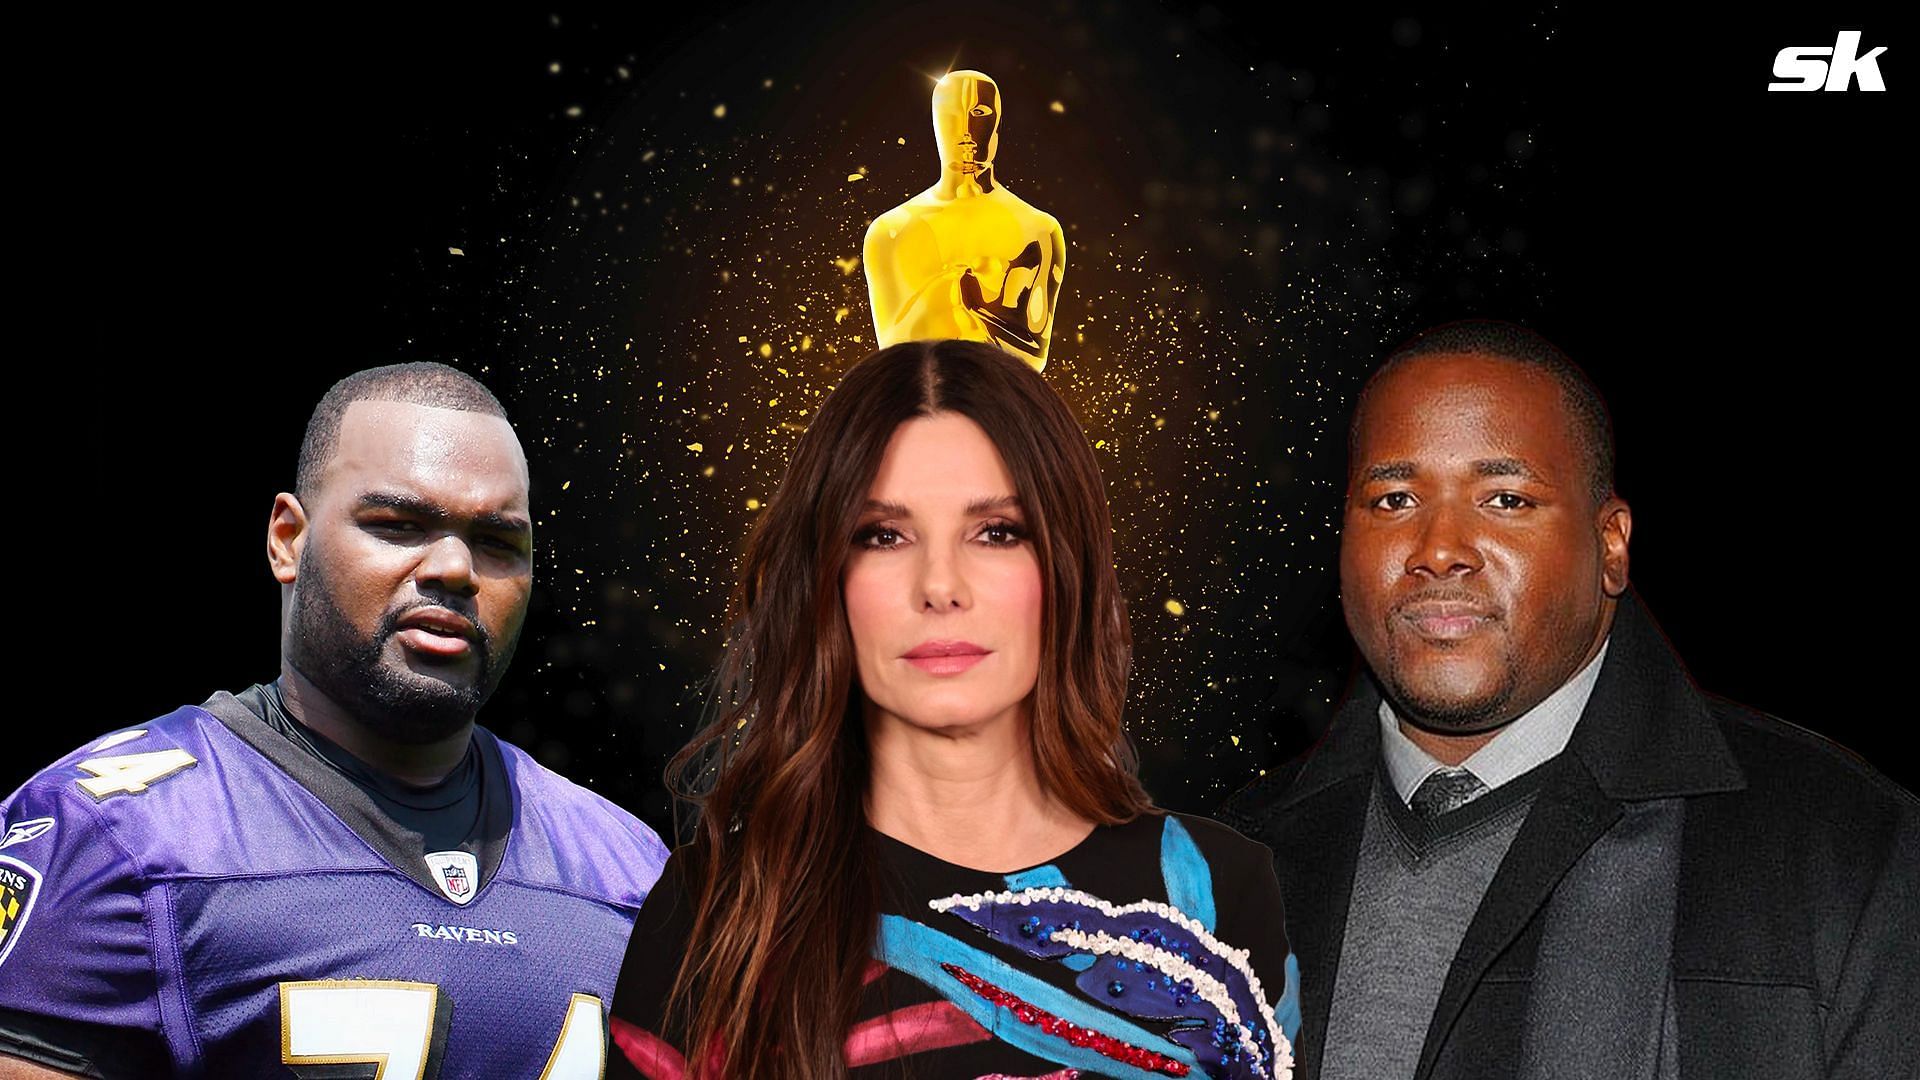 Michael Oher allegations have nothing to do with Sandra Bullock, claims Quinton Aaron